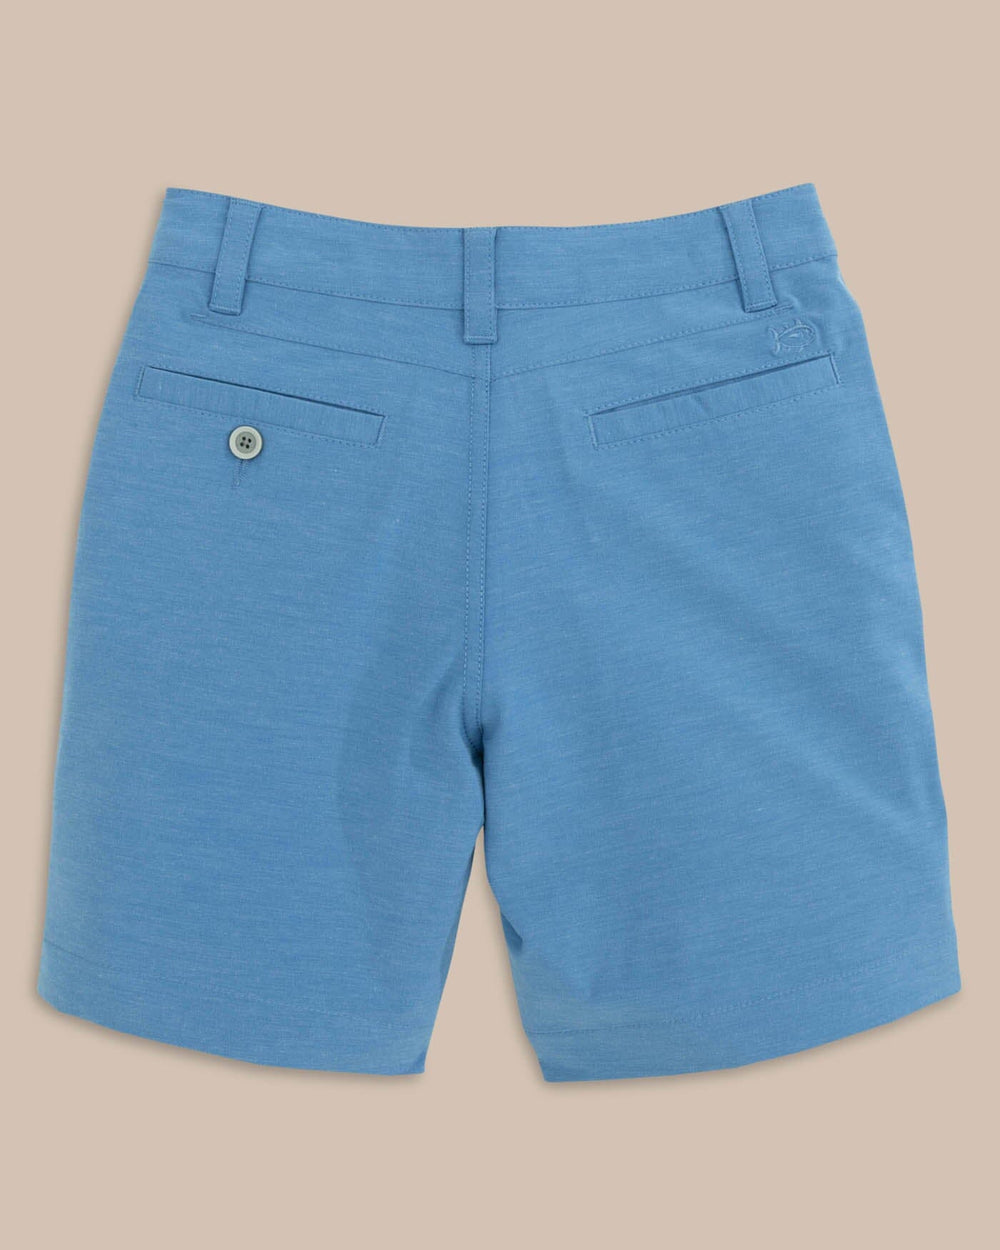 The back view of the Southern Tide Boys Heathered T3 Gulf Short by Southern Tide - Heather Atlantic Blue